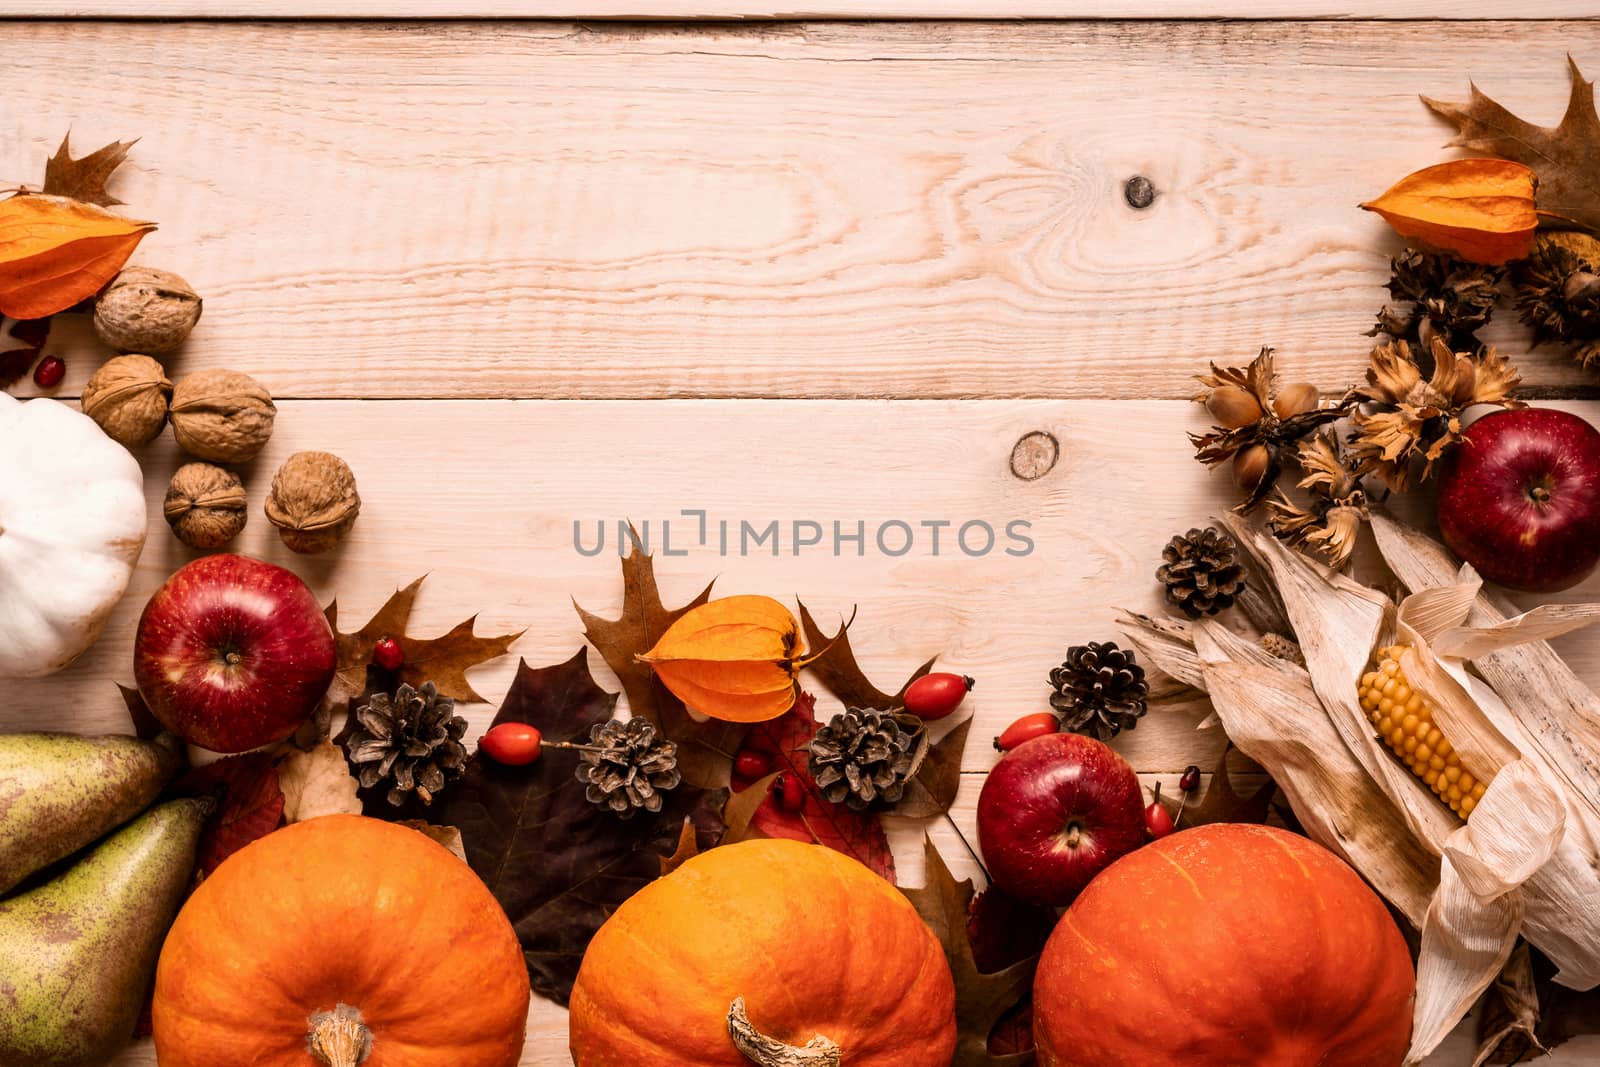 Autumn crops on a wooden board. by 84kamila